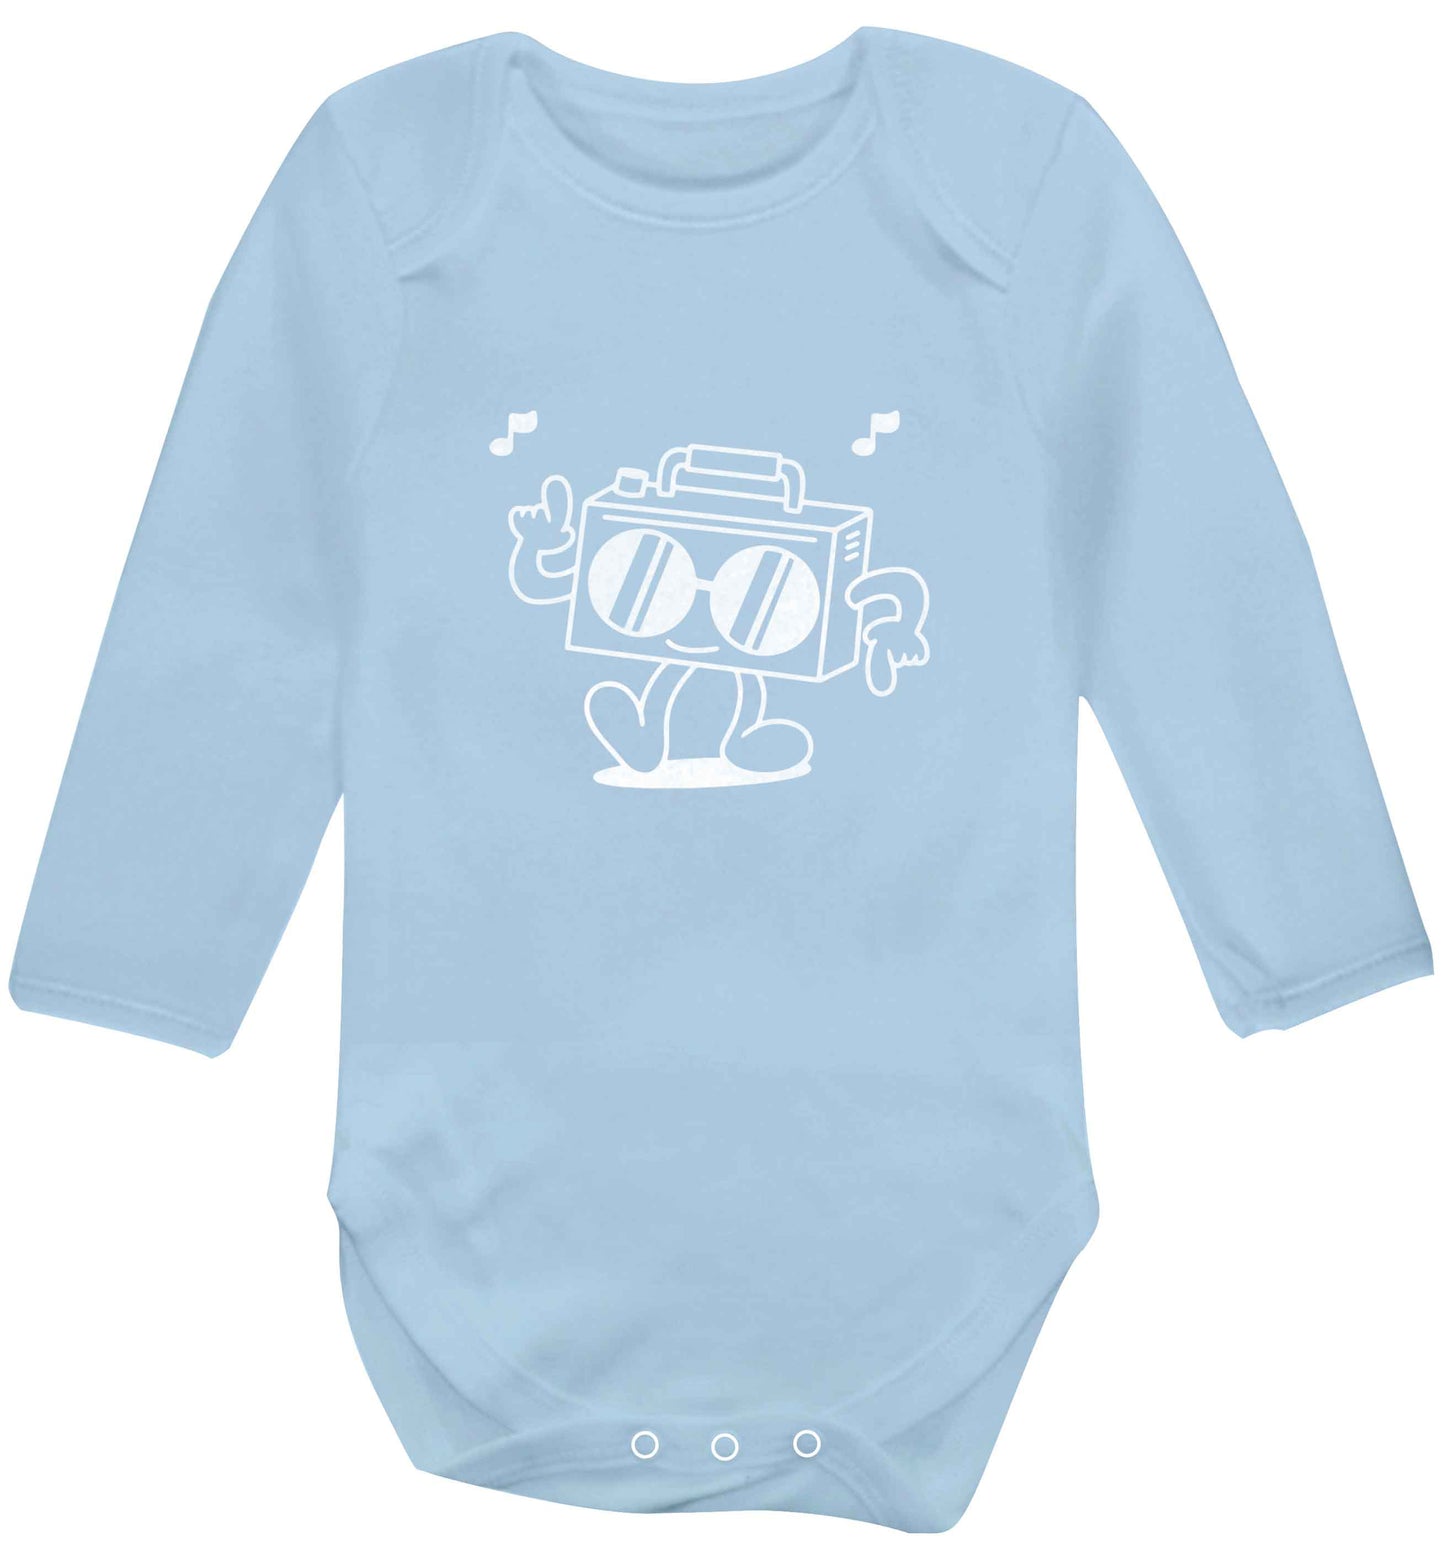 Boombox baby vest long sleeved pale blue 6-12 months